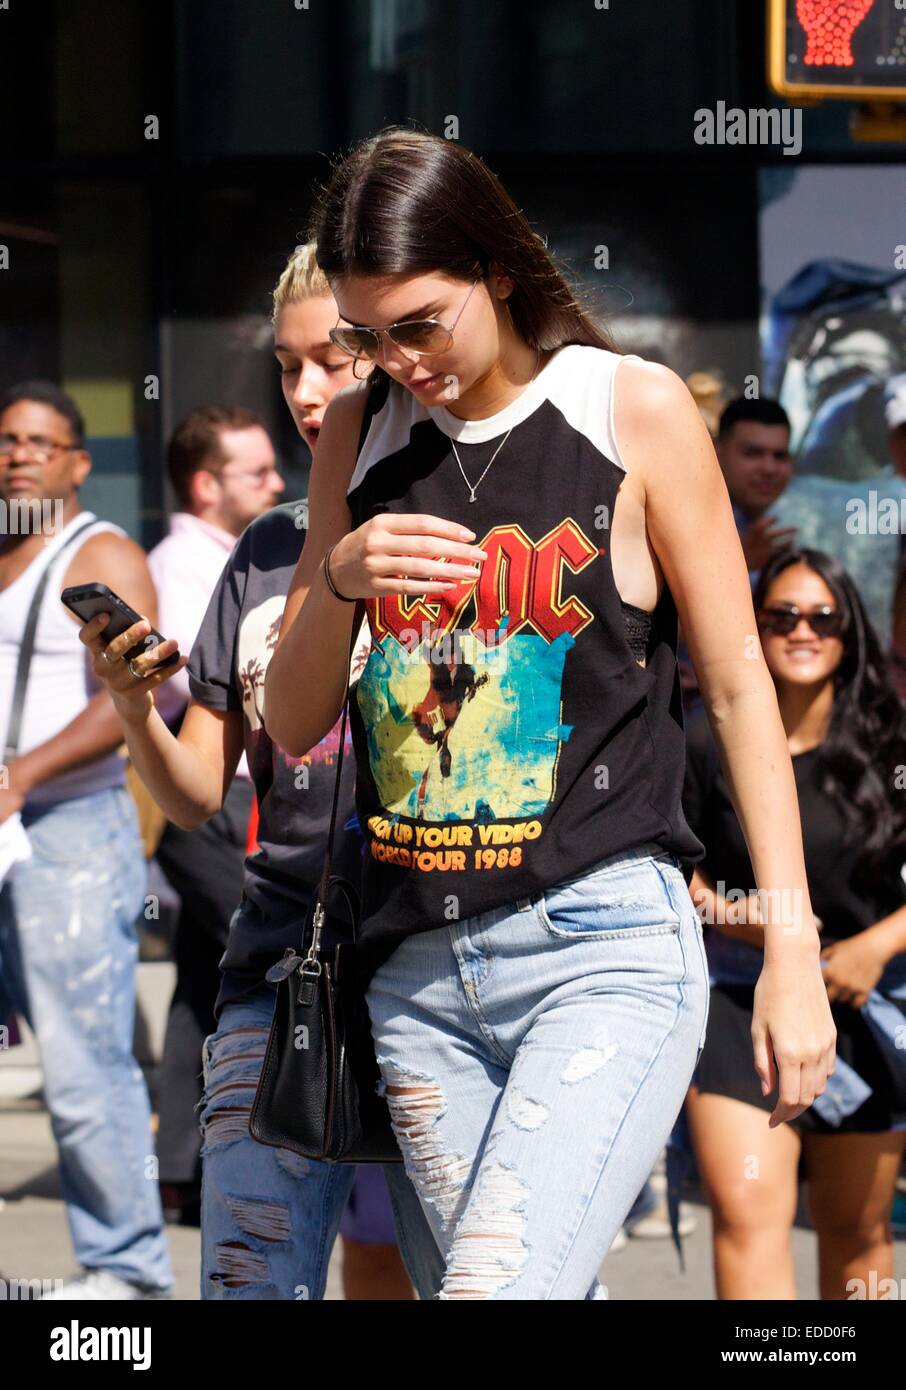 Kendall Jenner Accessorized Her Balenciaga Bag With 818 Tequila